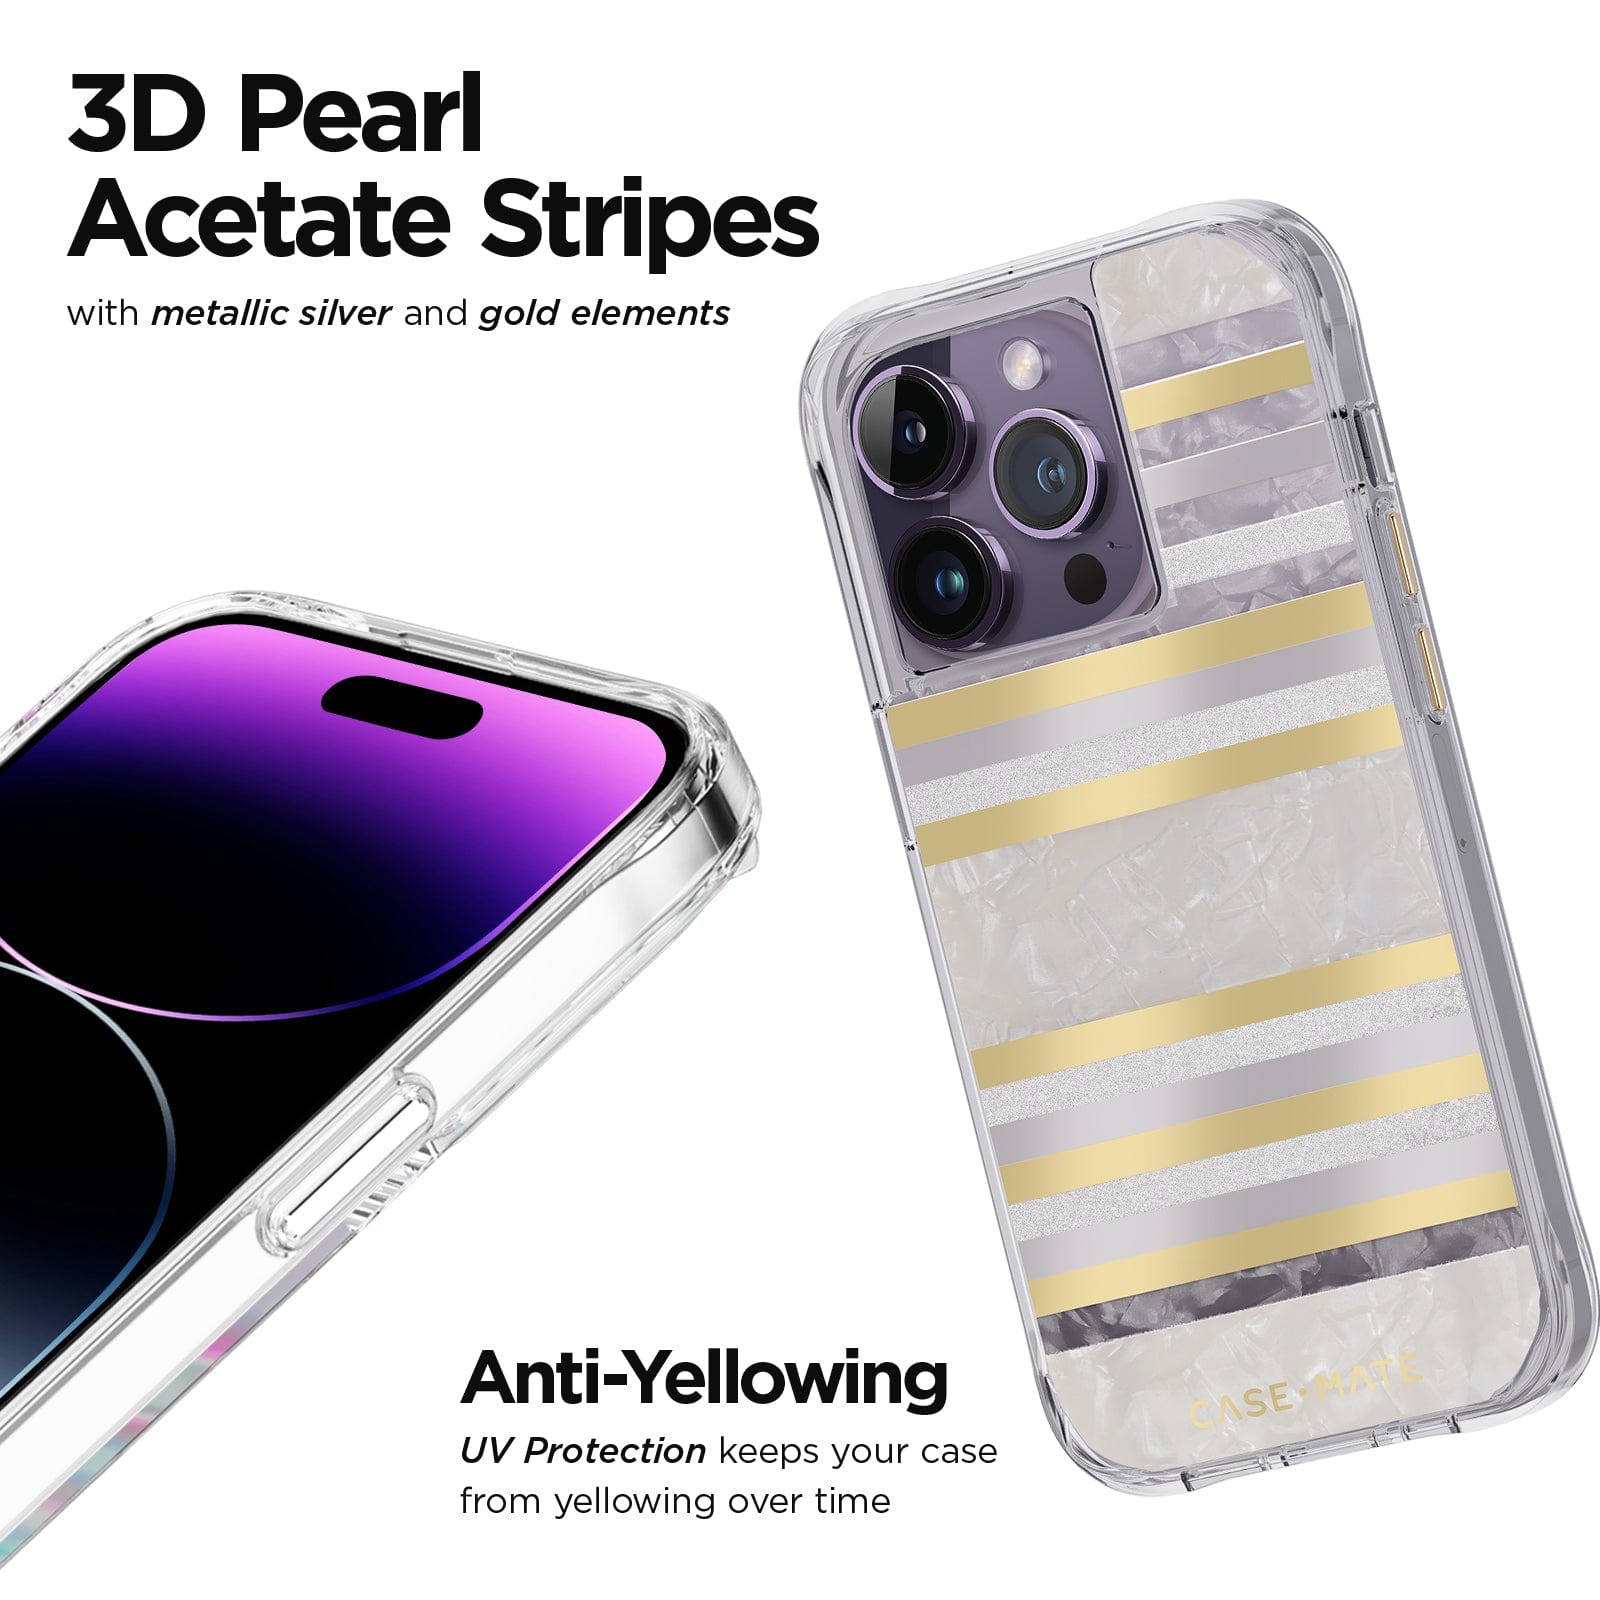 3D PEARL ACETATE STRIPES WITH METALLIC SILVER AND GOLD ELEMENTS. ANTI-YELLOWING UV PROTECTION KEEPS YOUR CASE FROM YELLOWING OVER TIME. 